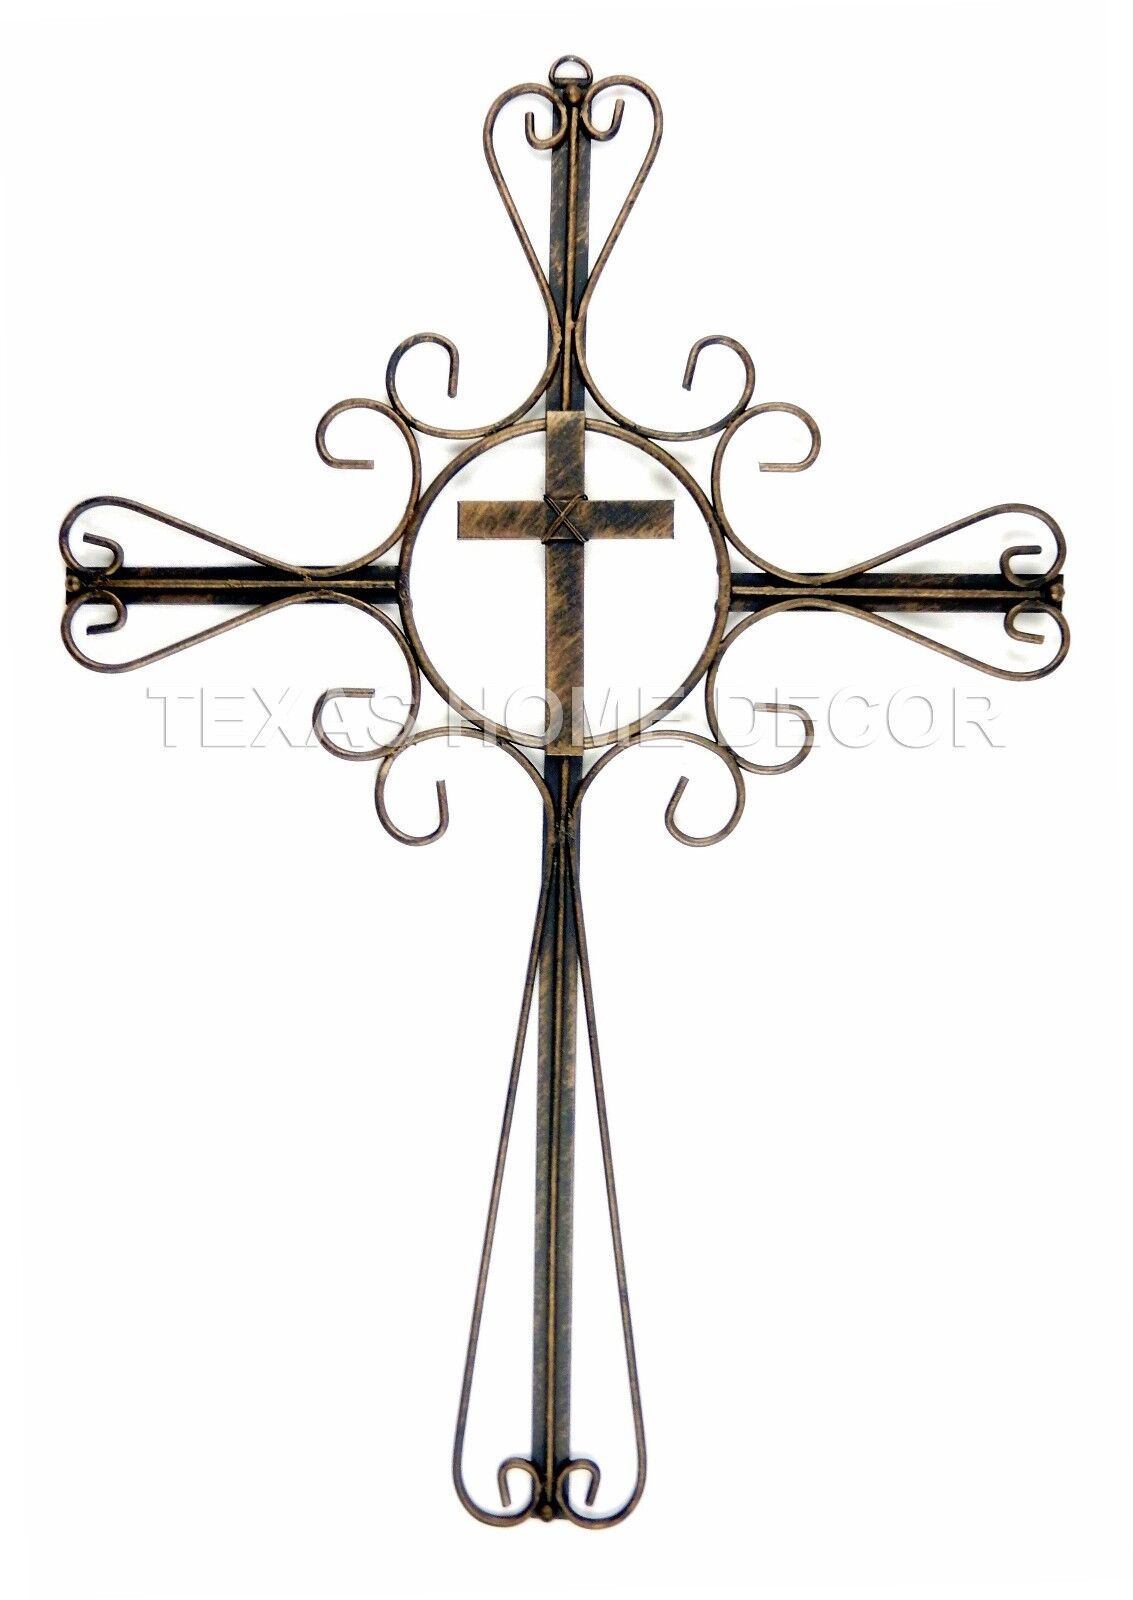 Western Tin Metal Wall Cross with Decorative Ornate Curly Design 17”x 12”  